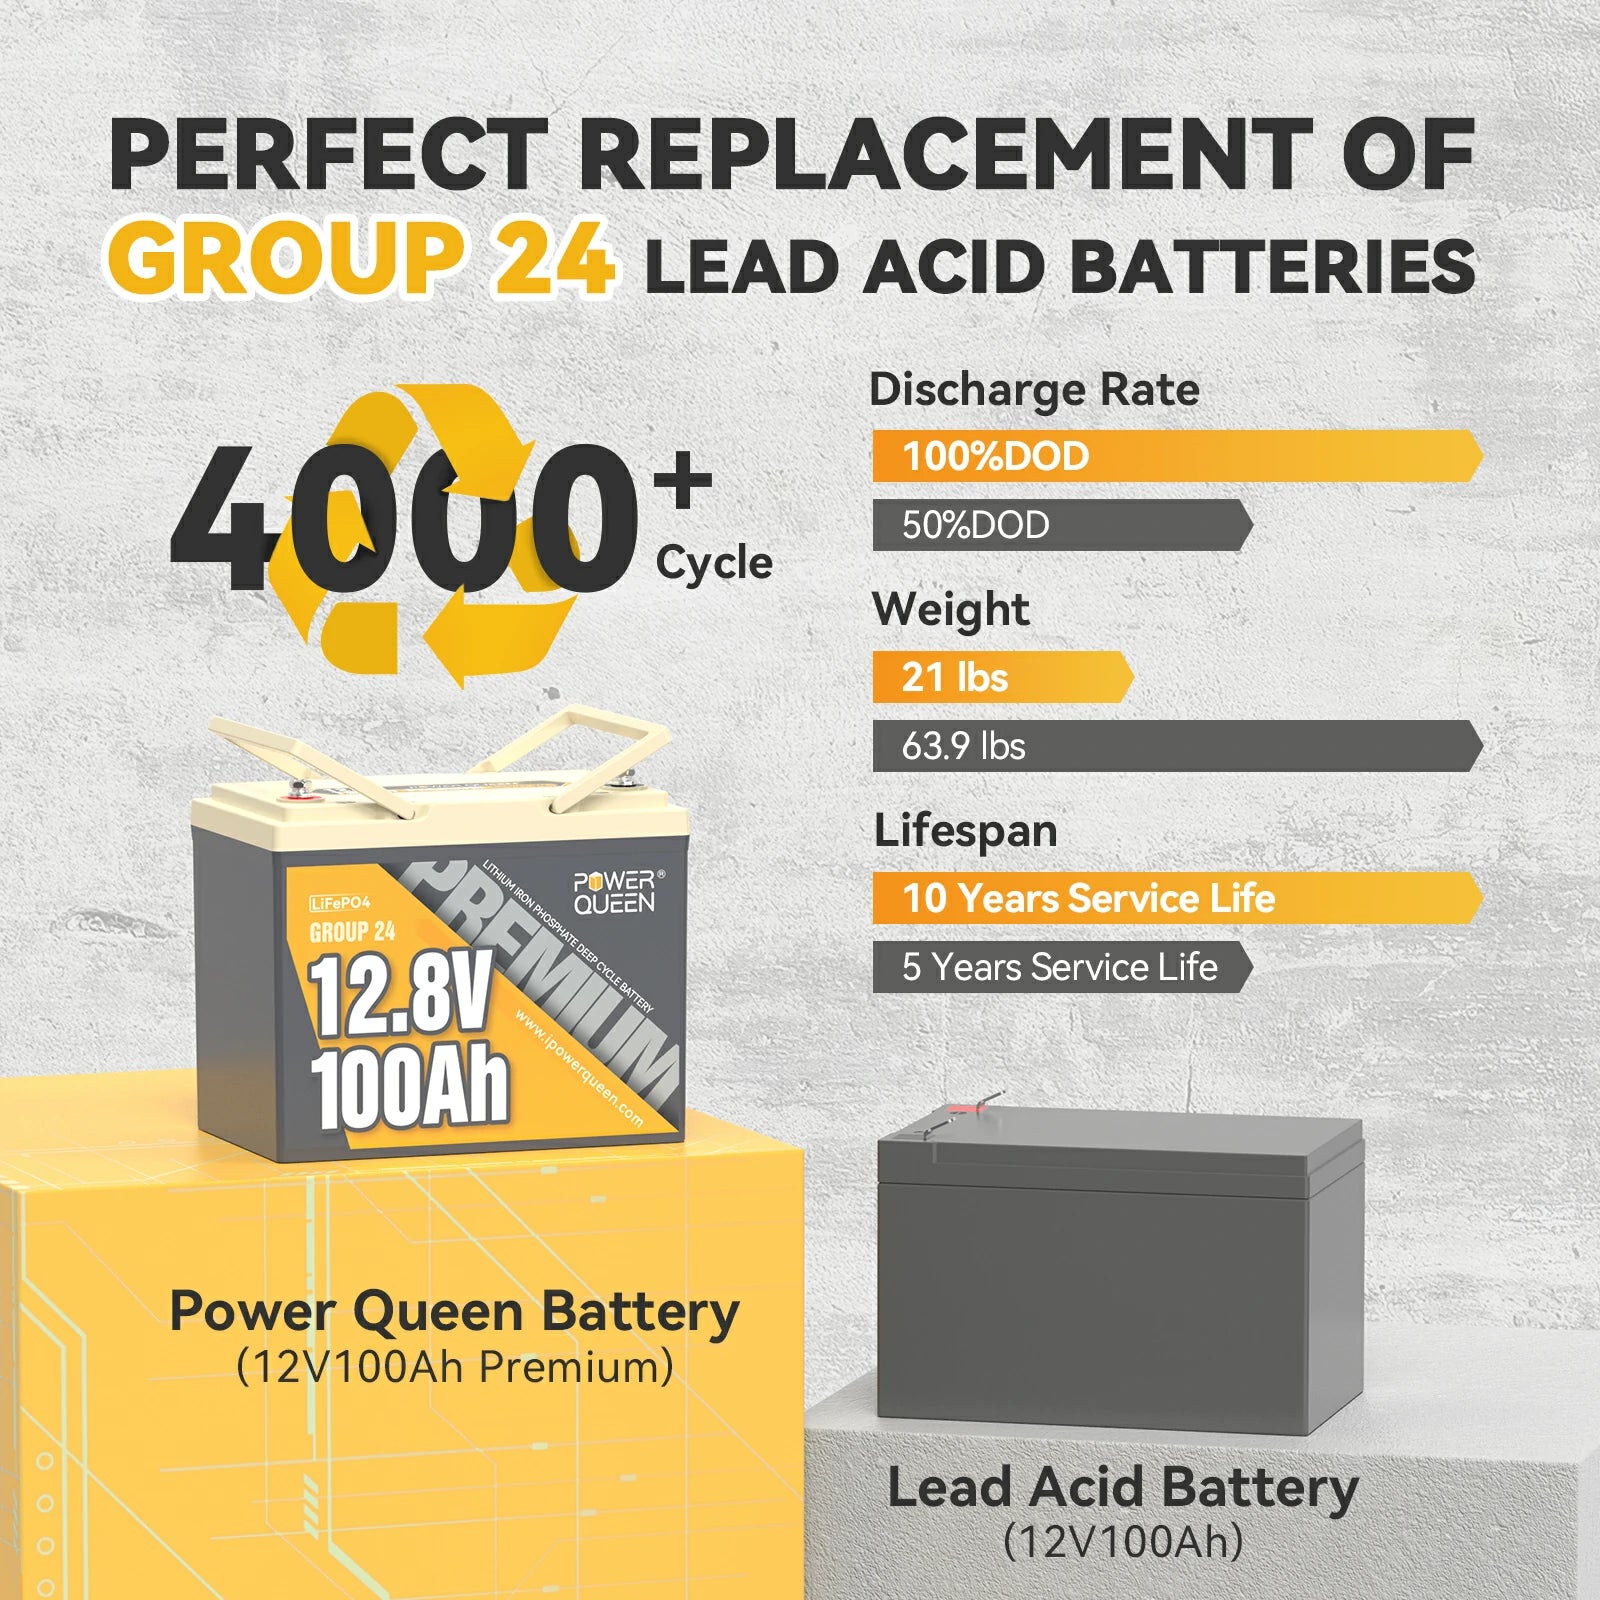 Power-Queen-group-24-battery-compare-with-lead-acid-battery